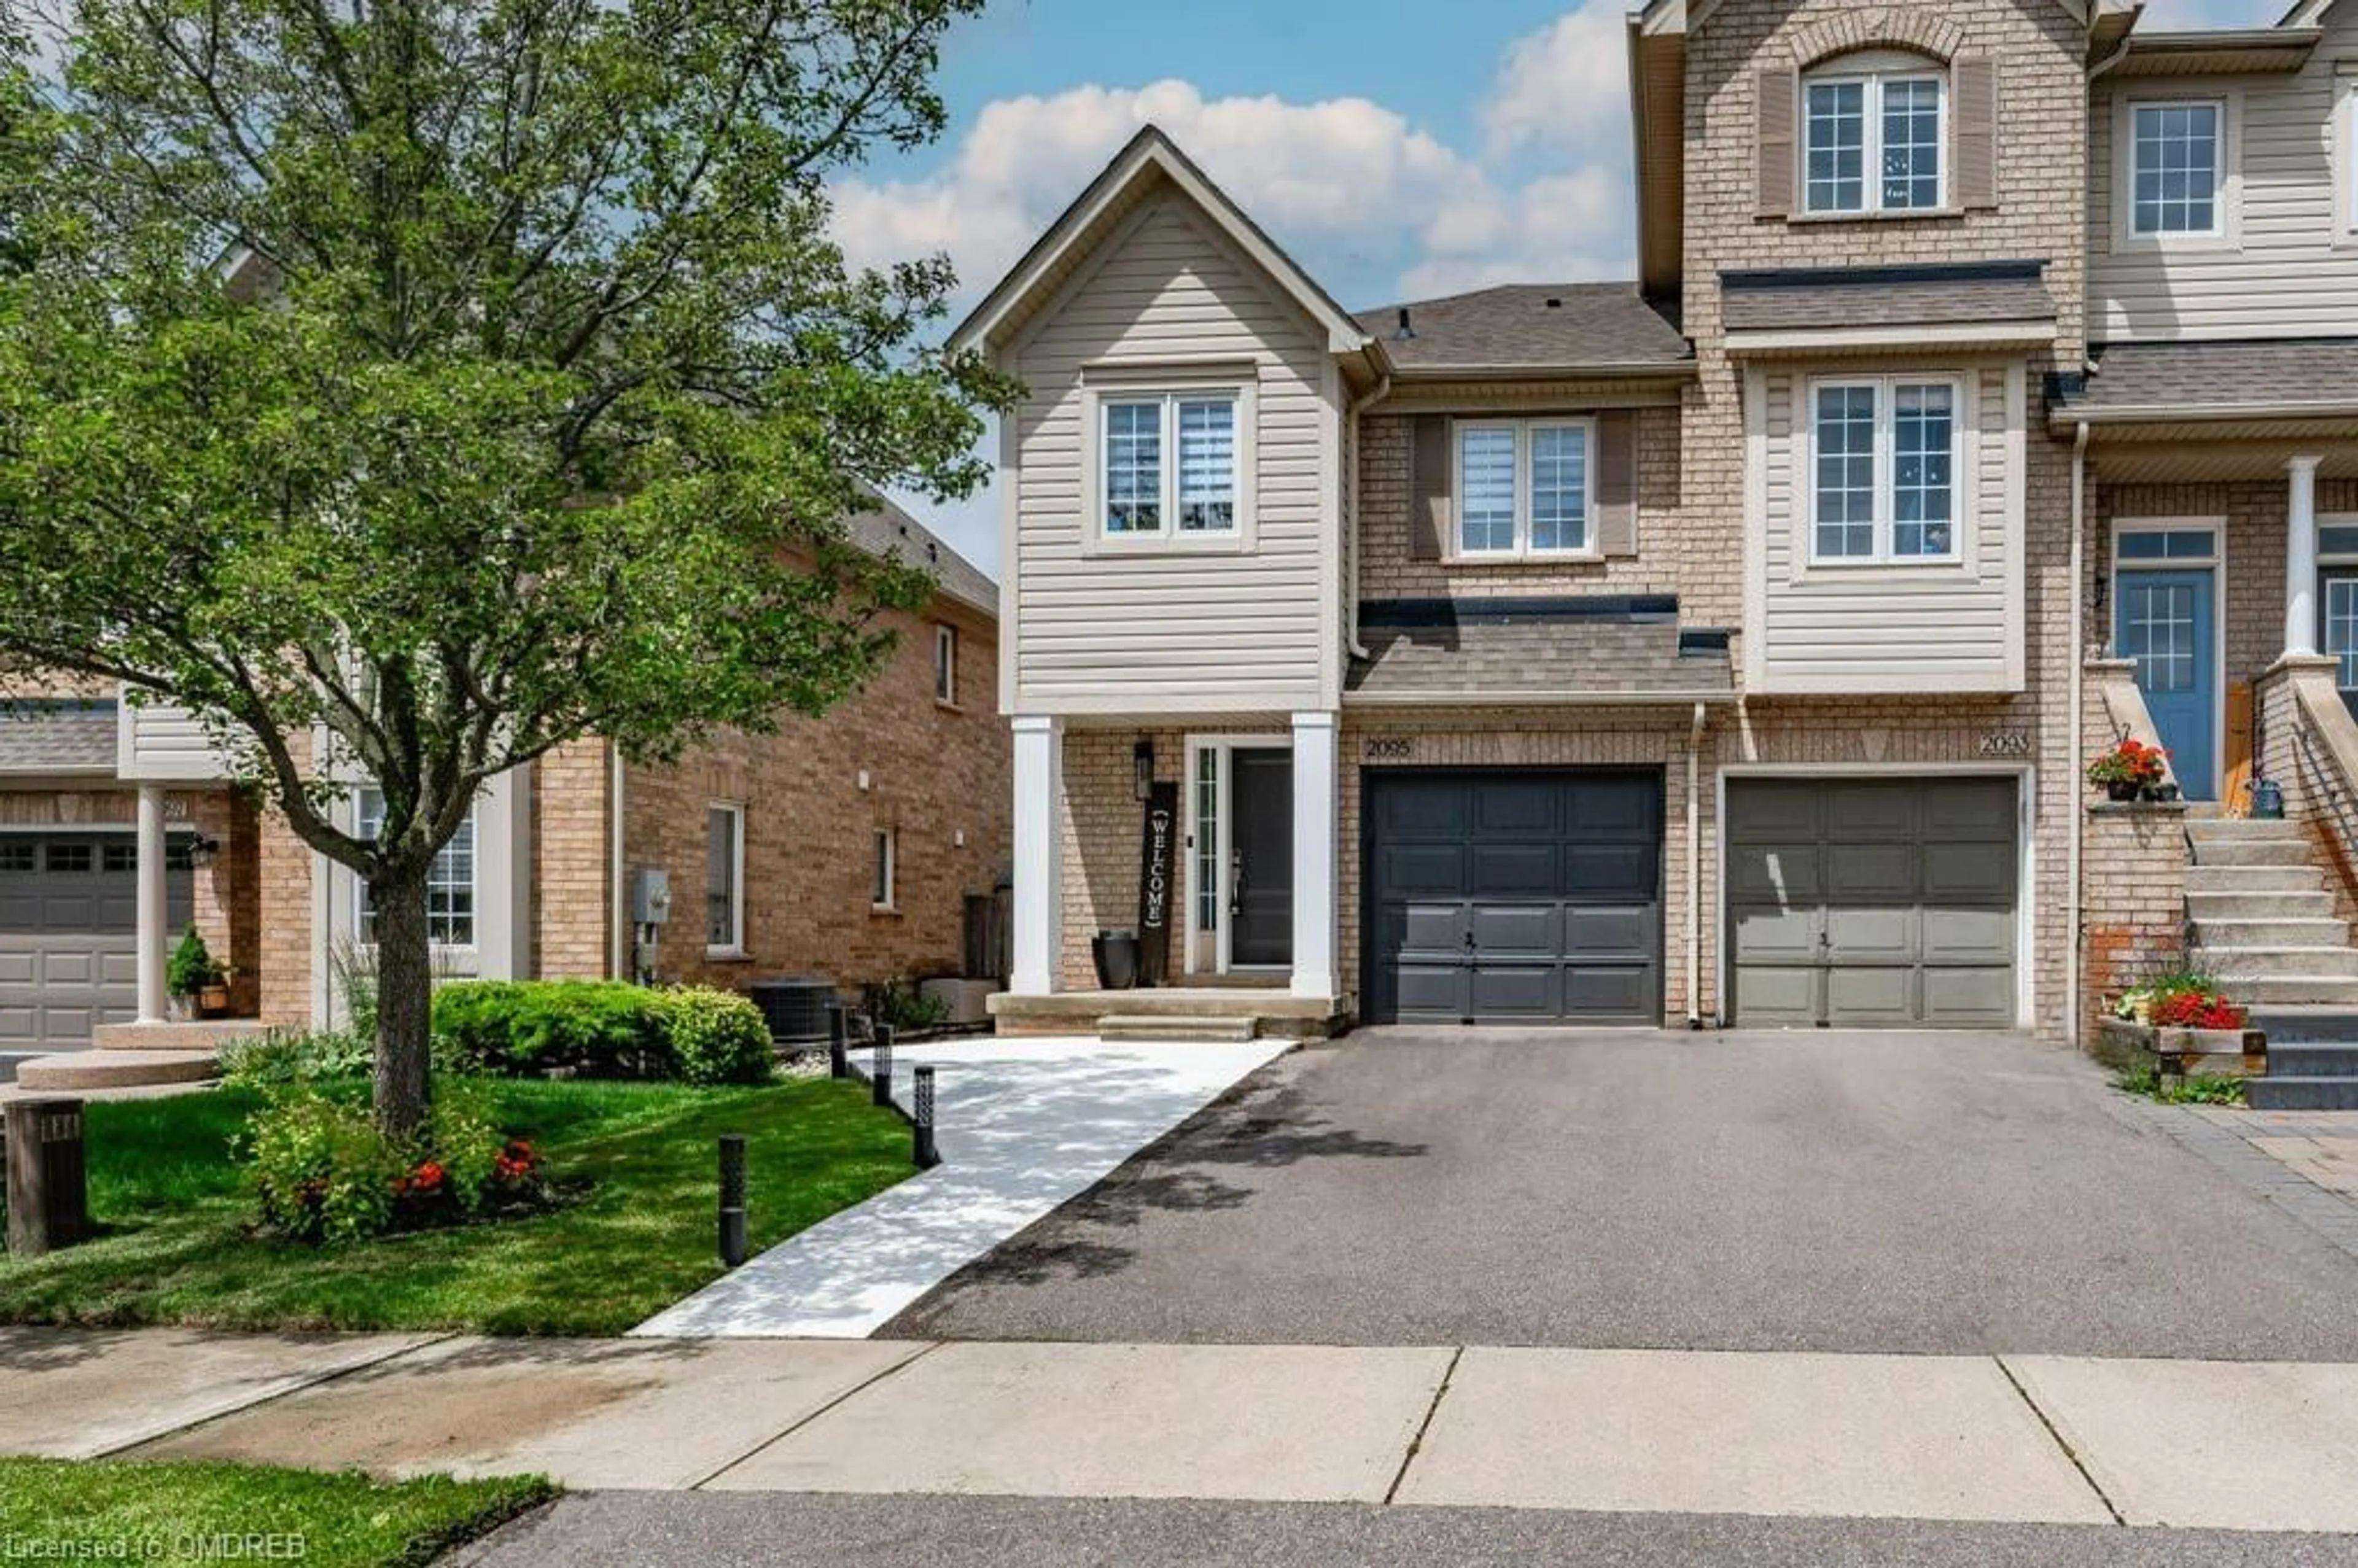 Home with brick exterior material for 2095 Glenhampton Rd, Oakville Ontario L6M 3W9